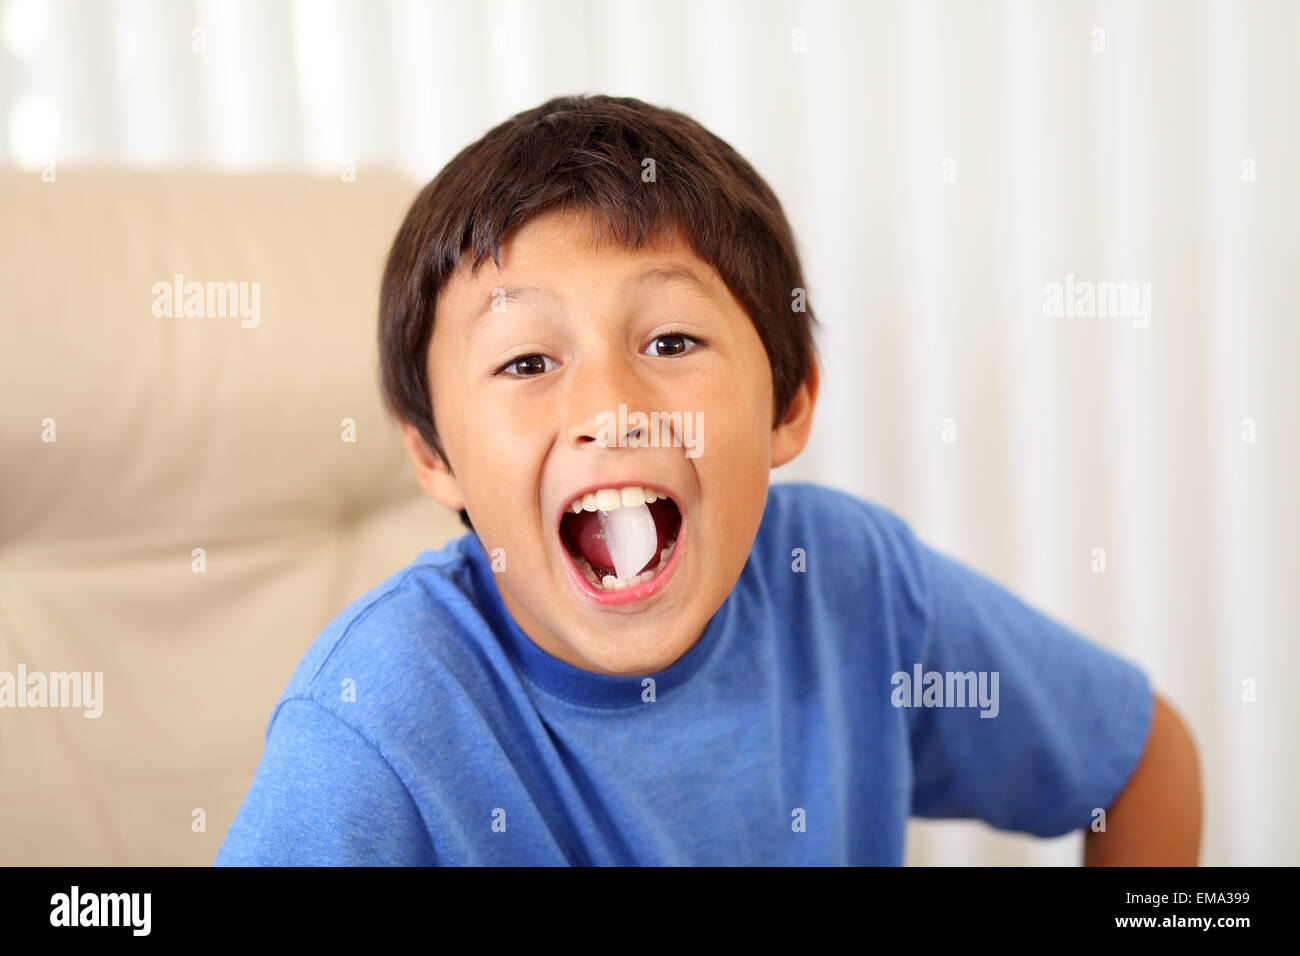 Young boy eating ice cube Stock Photo